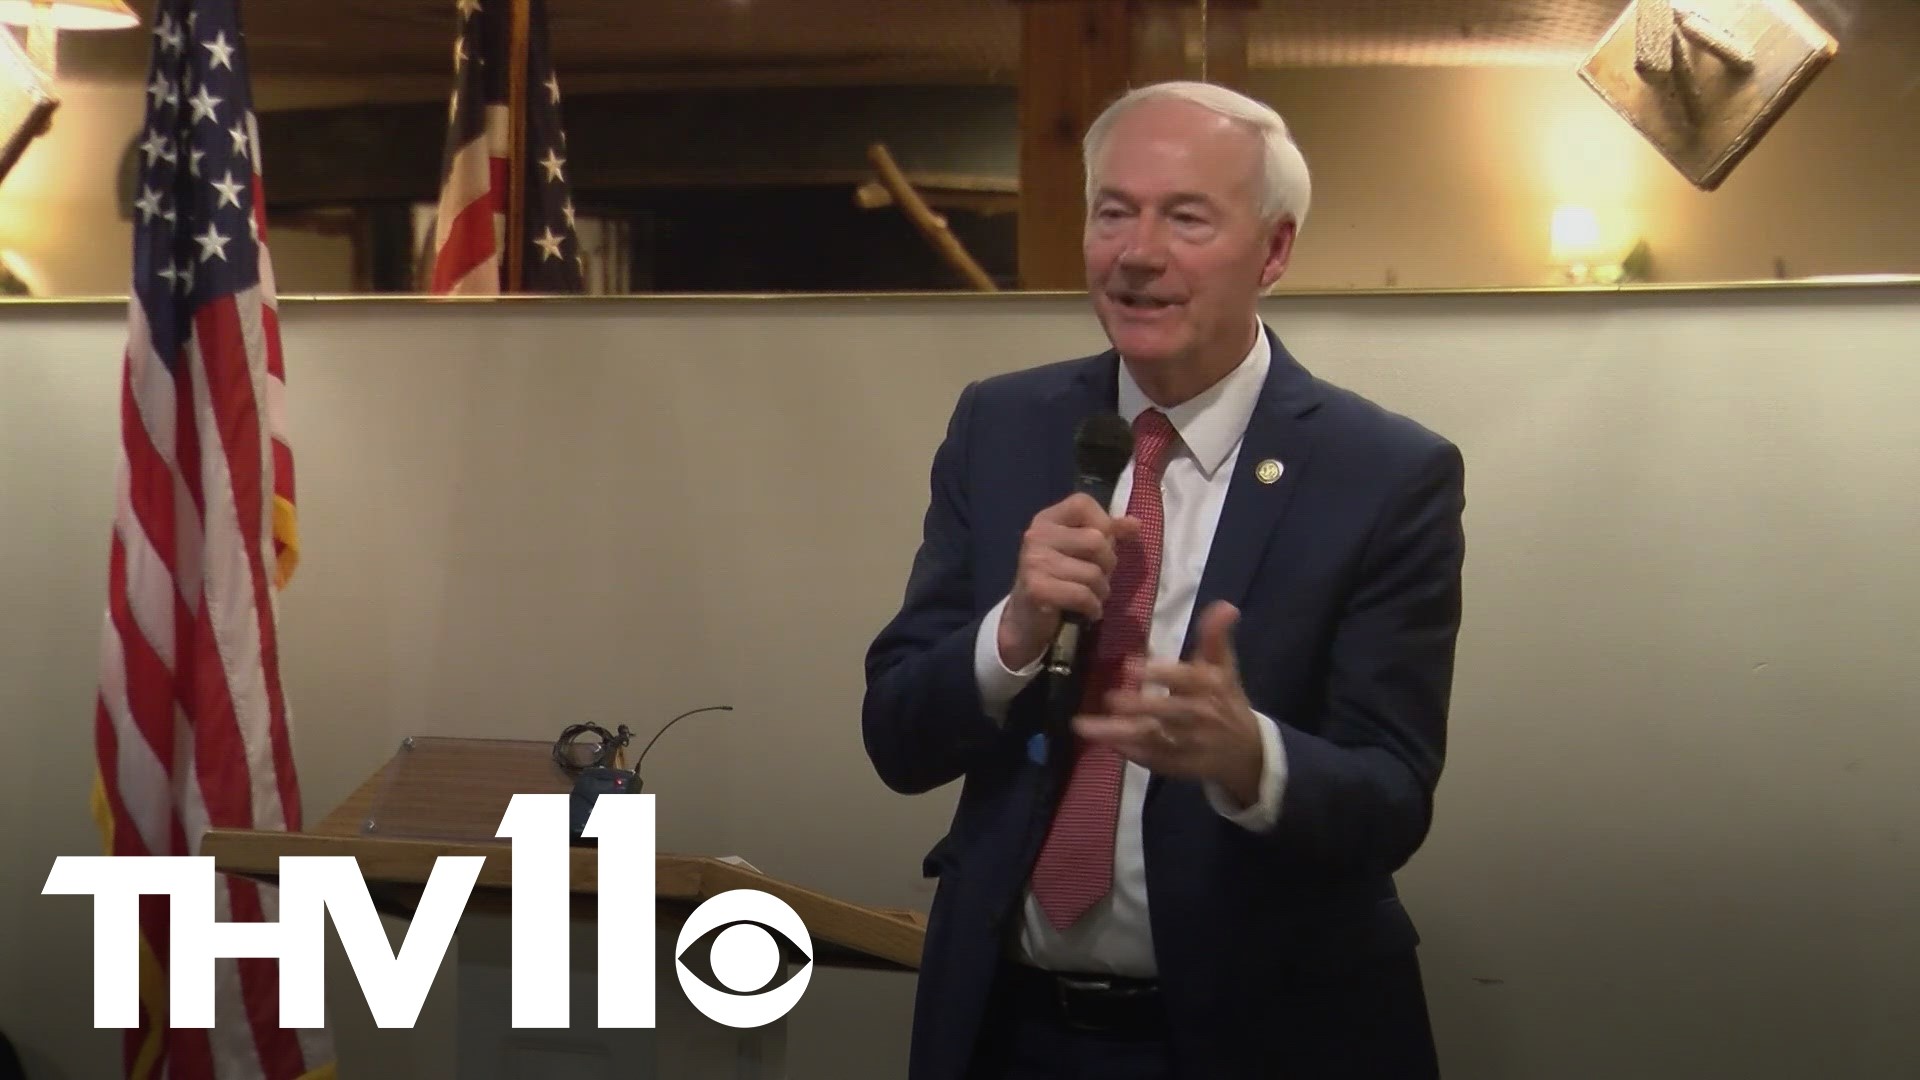 As the hours countdown to the first Republican debate of 2023, people across the country and in Arkansas will be looking to former Gov. Asa Hutchinson.